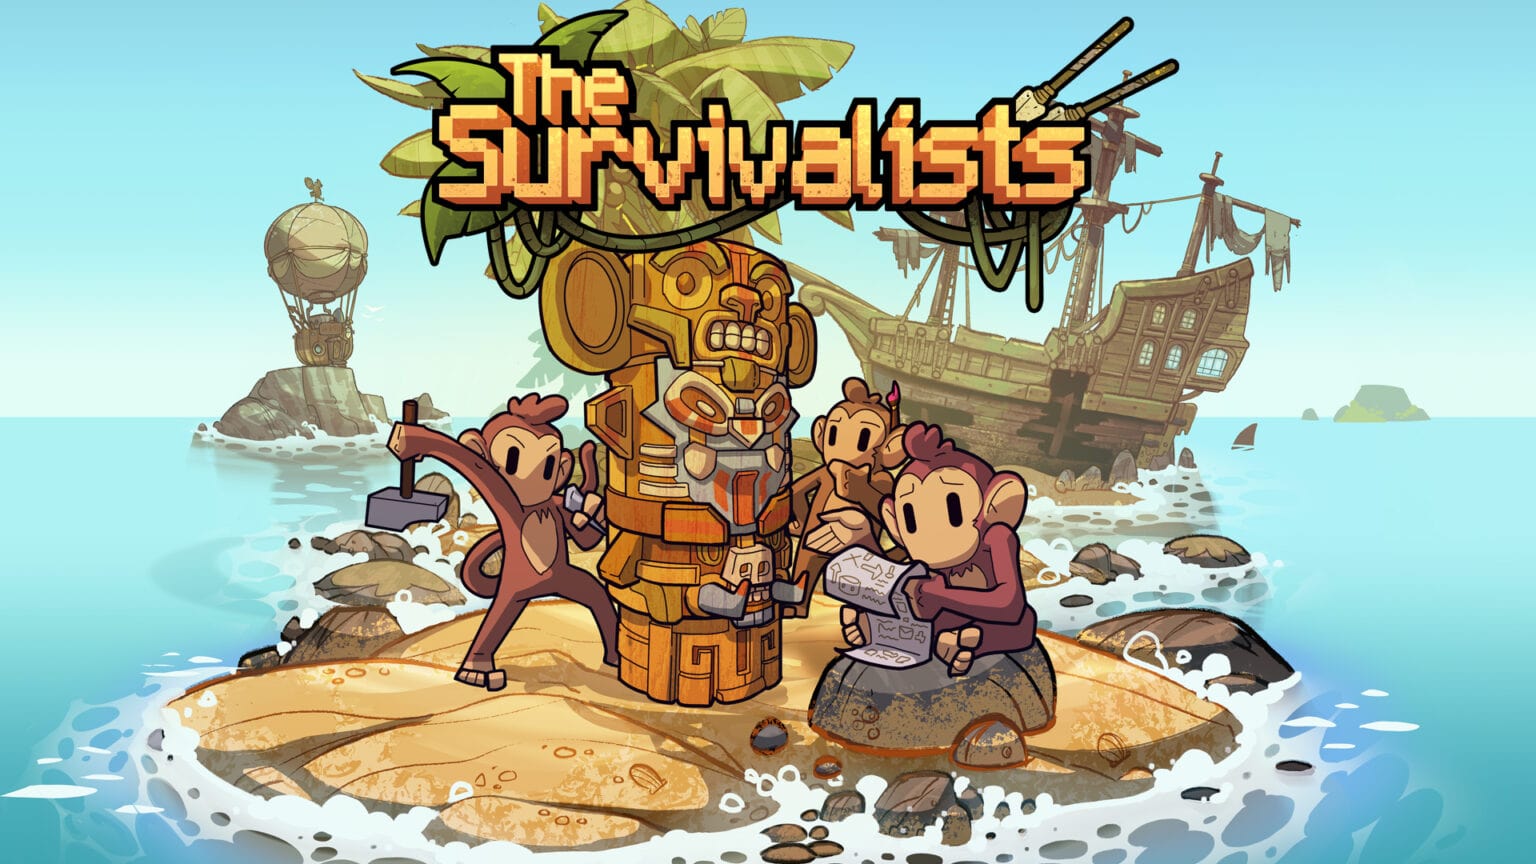 ‘The Survivalists’ debuted Friday on Apple Arcade